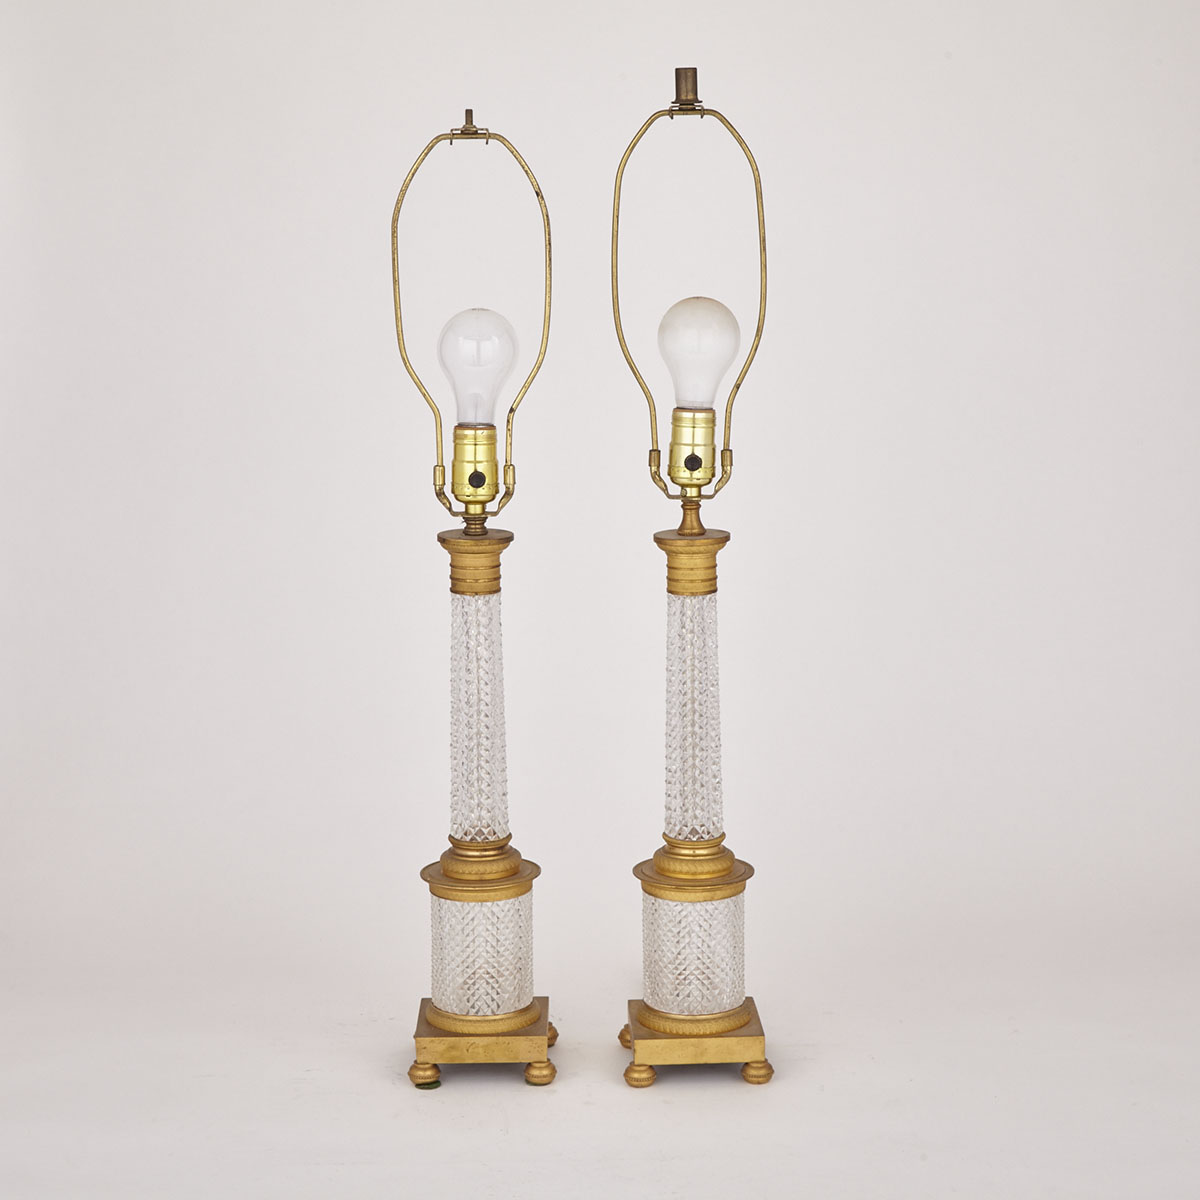 Pair of Austrian Ormolu Mounted Cut Glass Column Form Table Lamps, mid 20th century